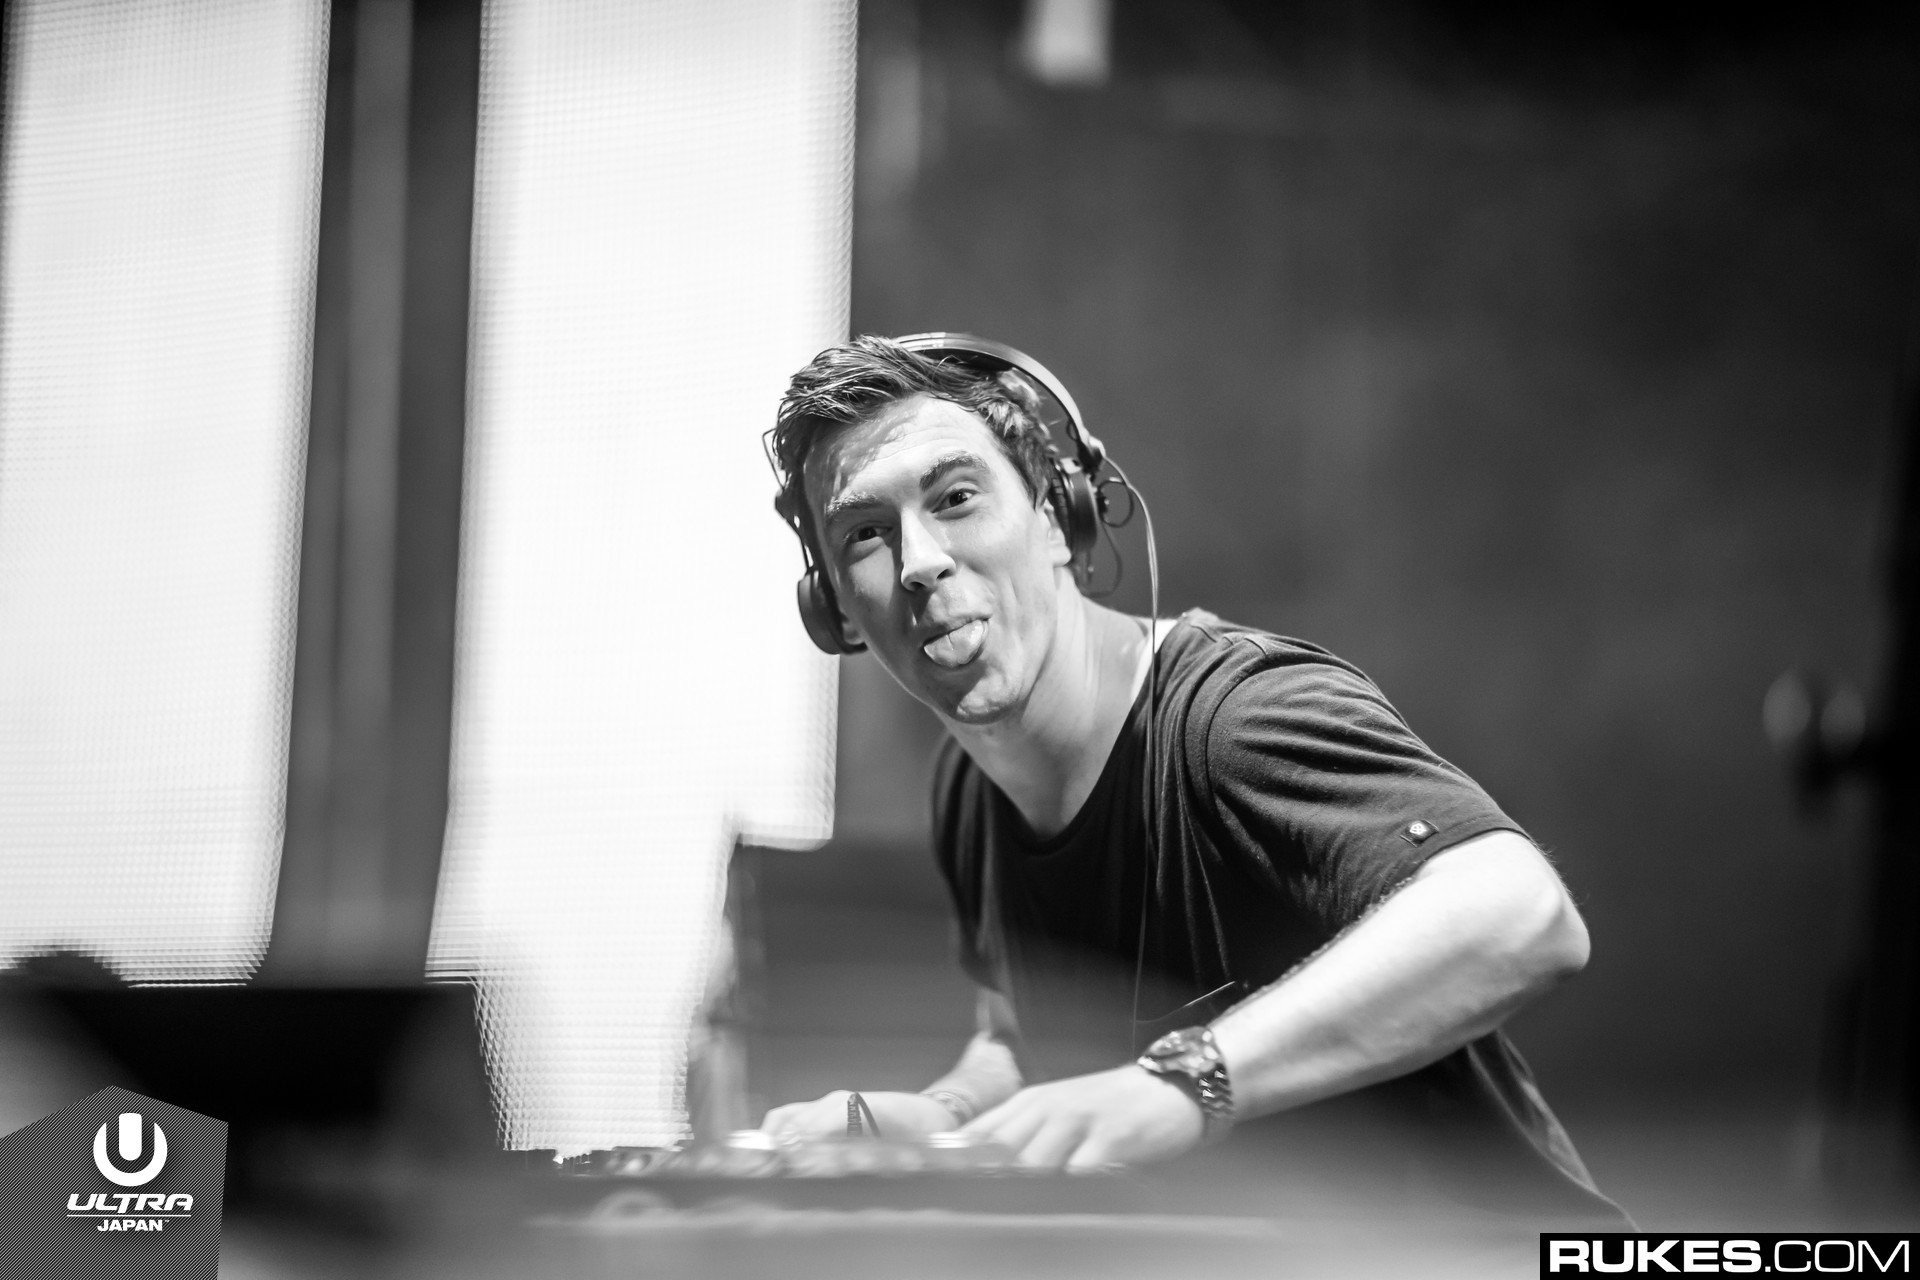 Hardwell Full HD Wallpaper And Background Id